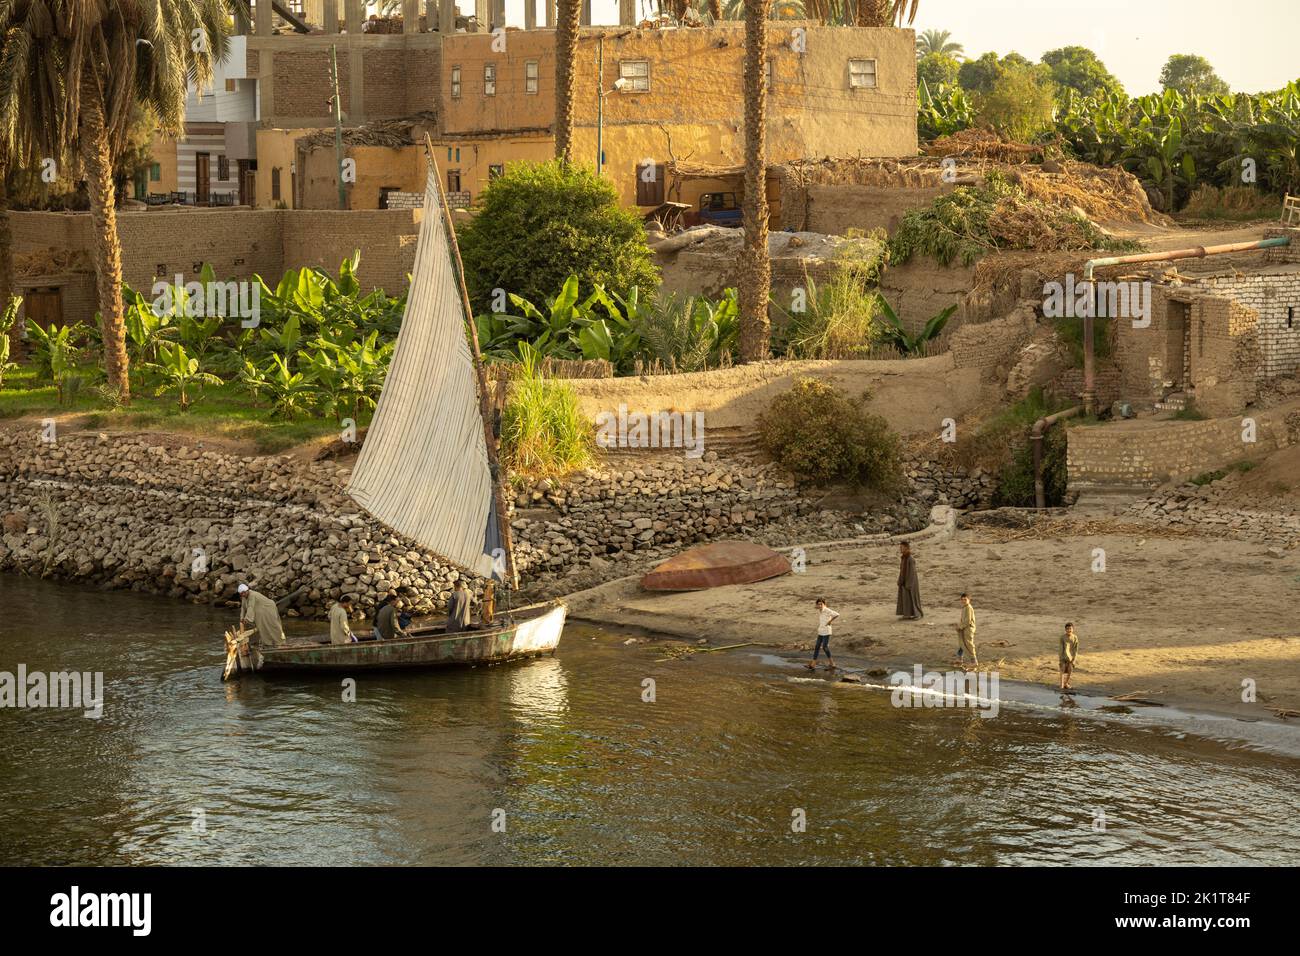 A felucca sailing boat at the shore of the Nile river, Egypt Stock Photo